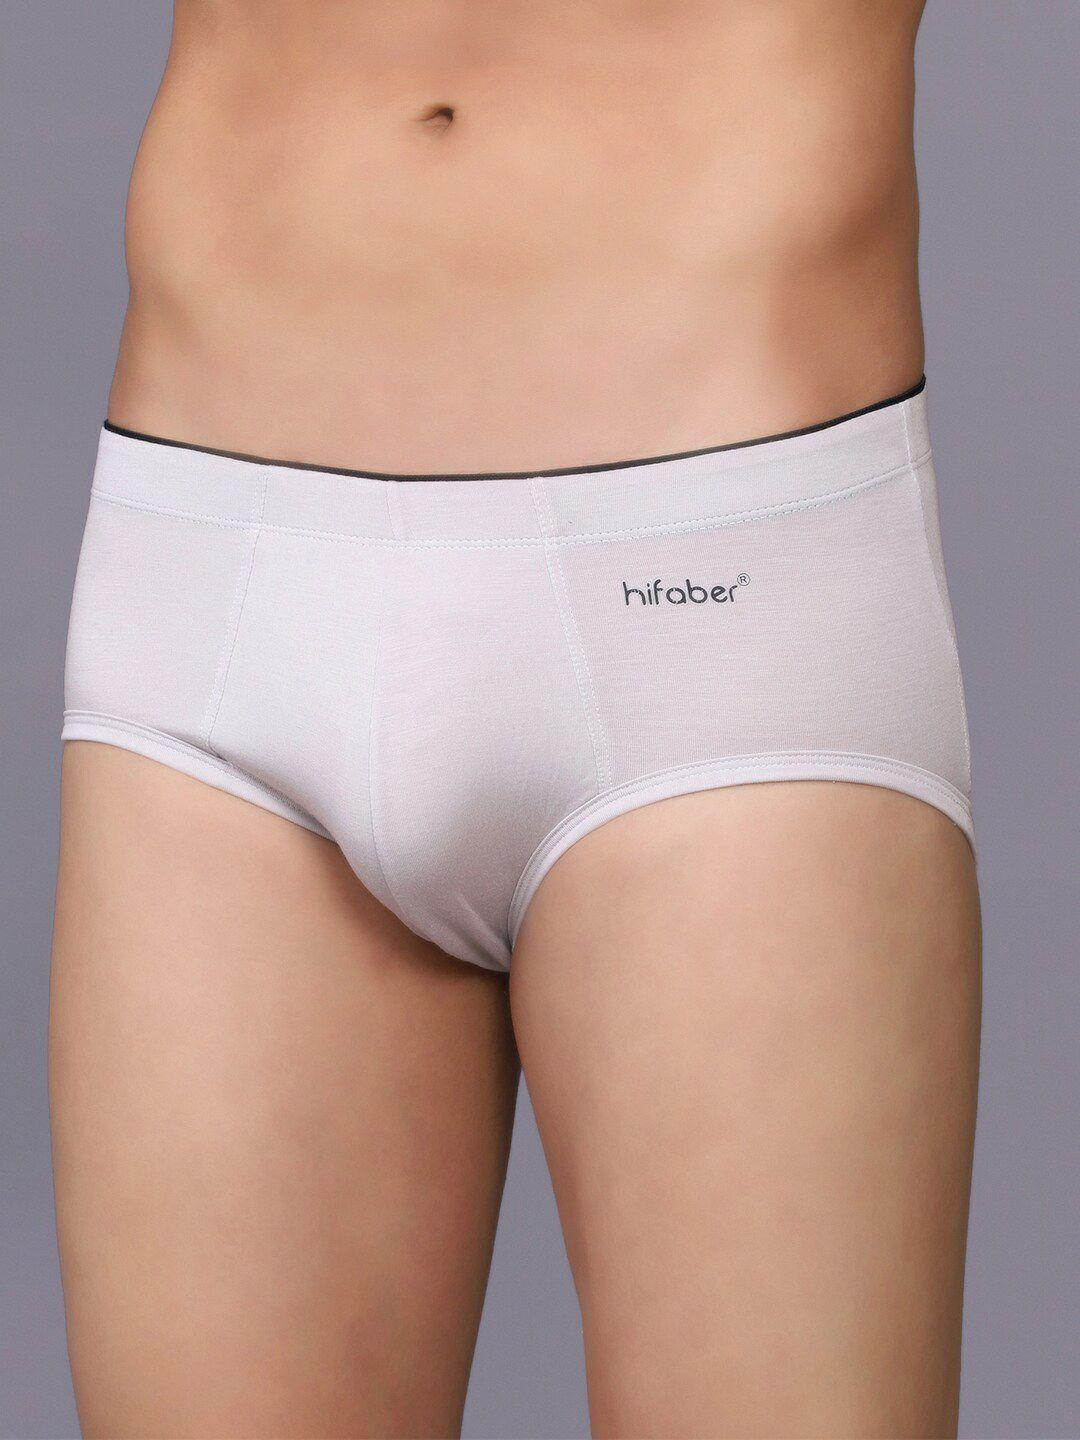 hifaber men mid-rise anti-bacterial hipster briefs h0665_s-